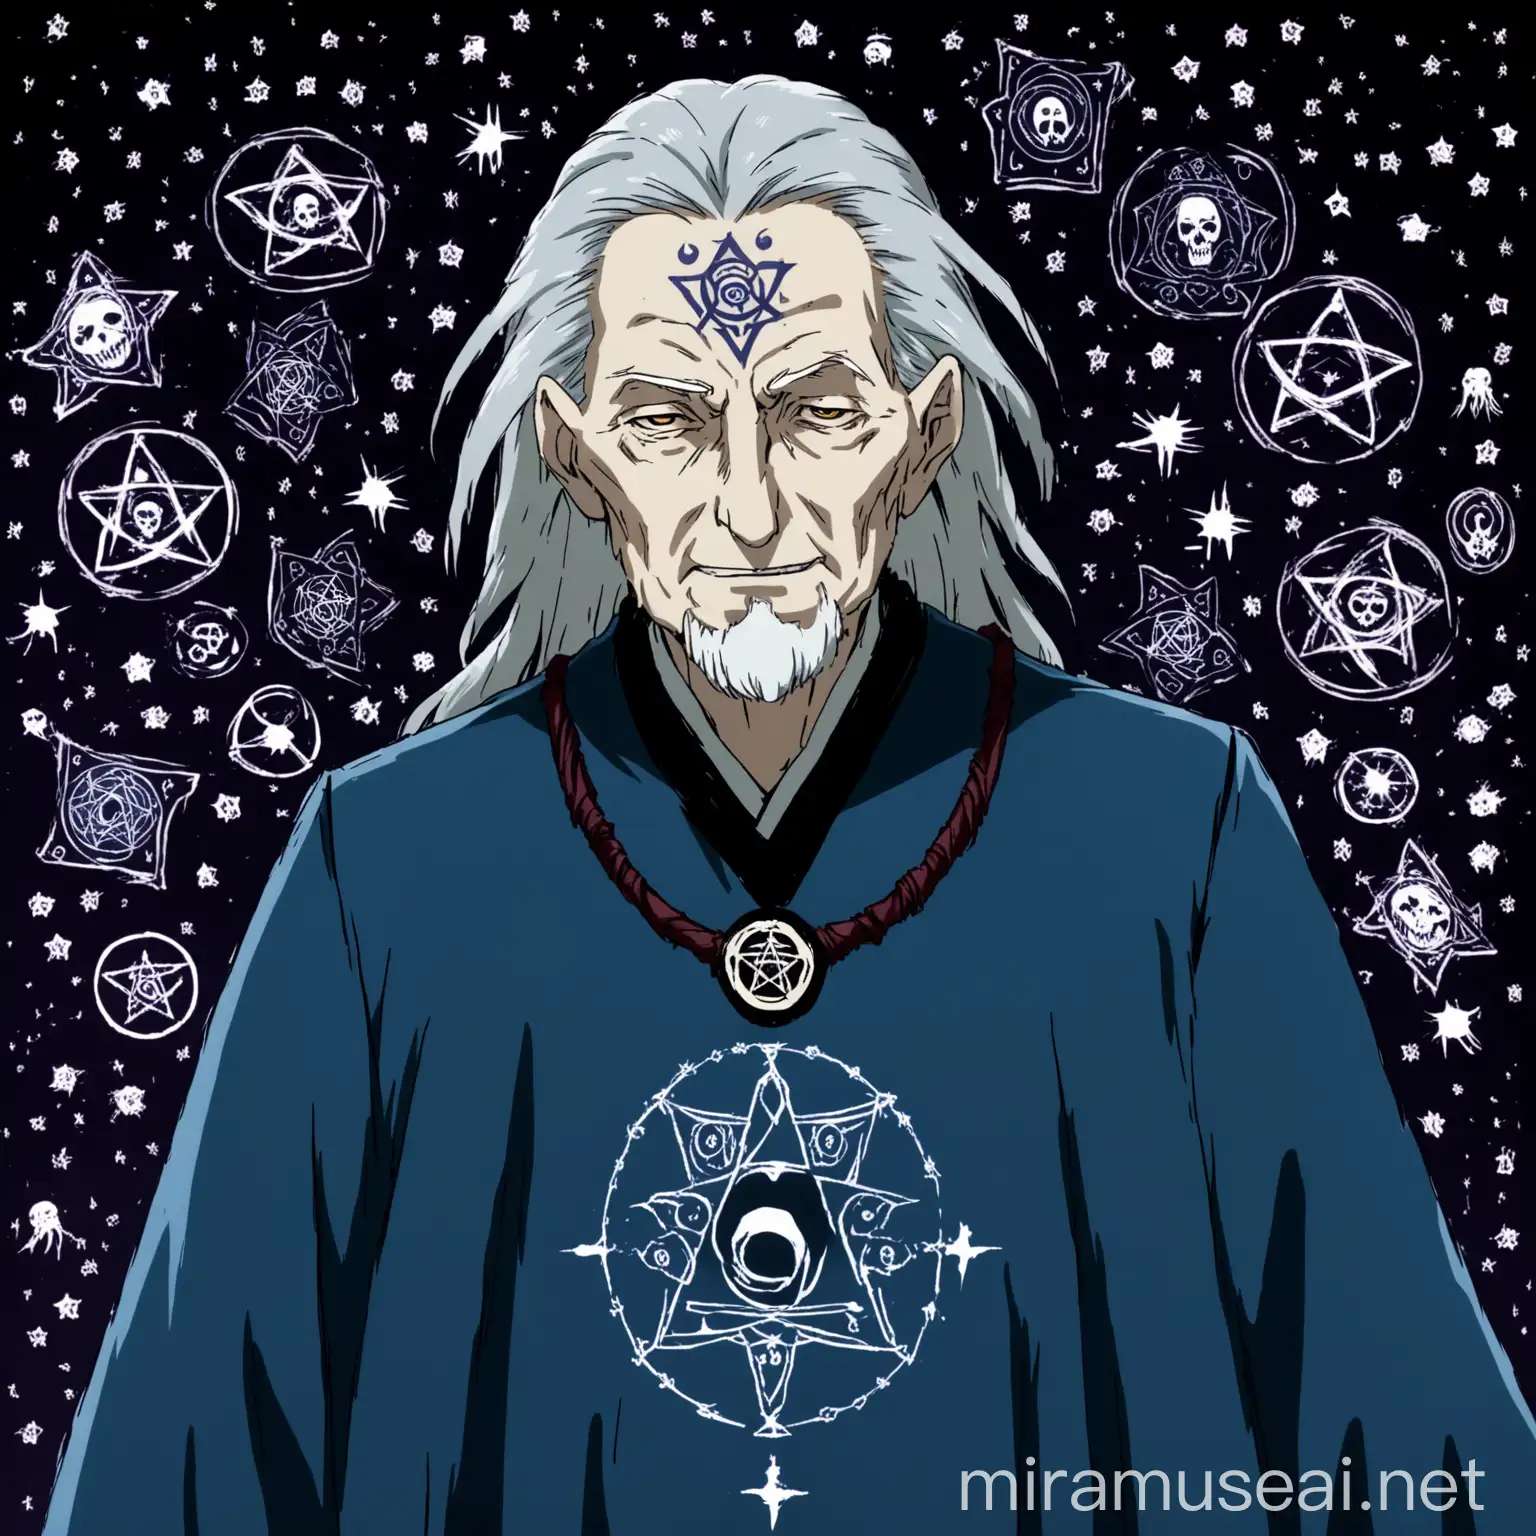 Malevolent Anime Necromancer with Grey Hair and Cultist Symbols